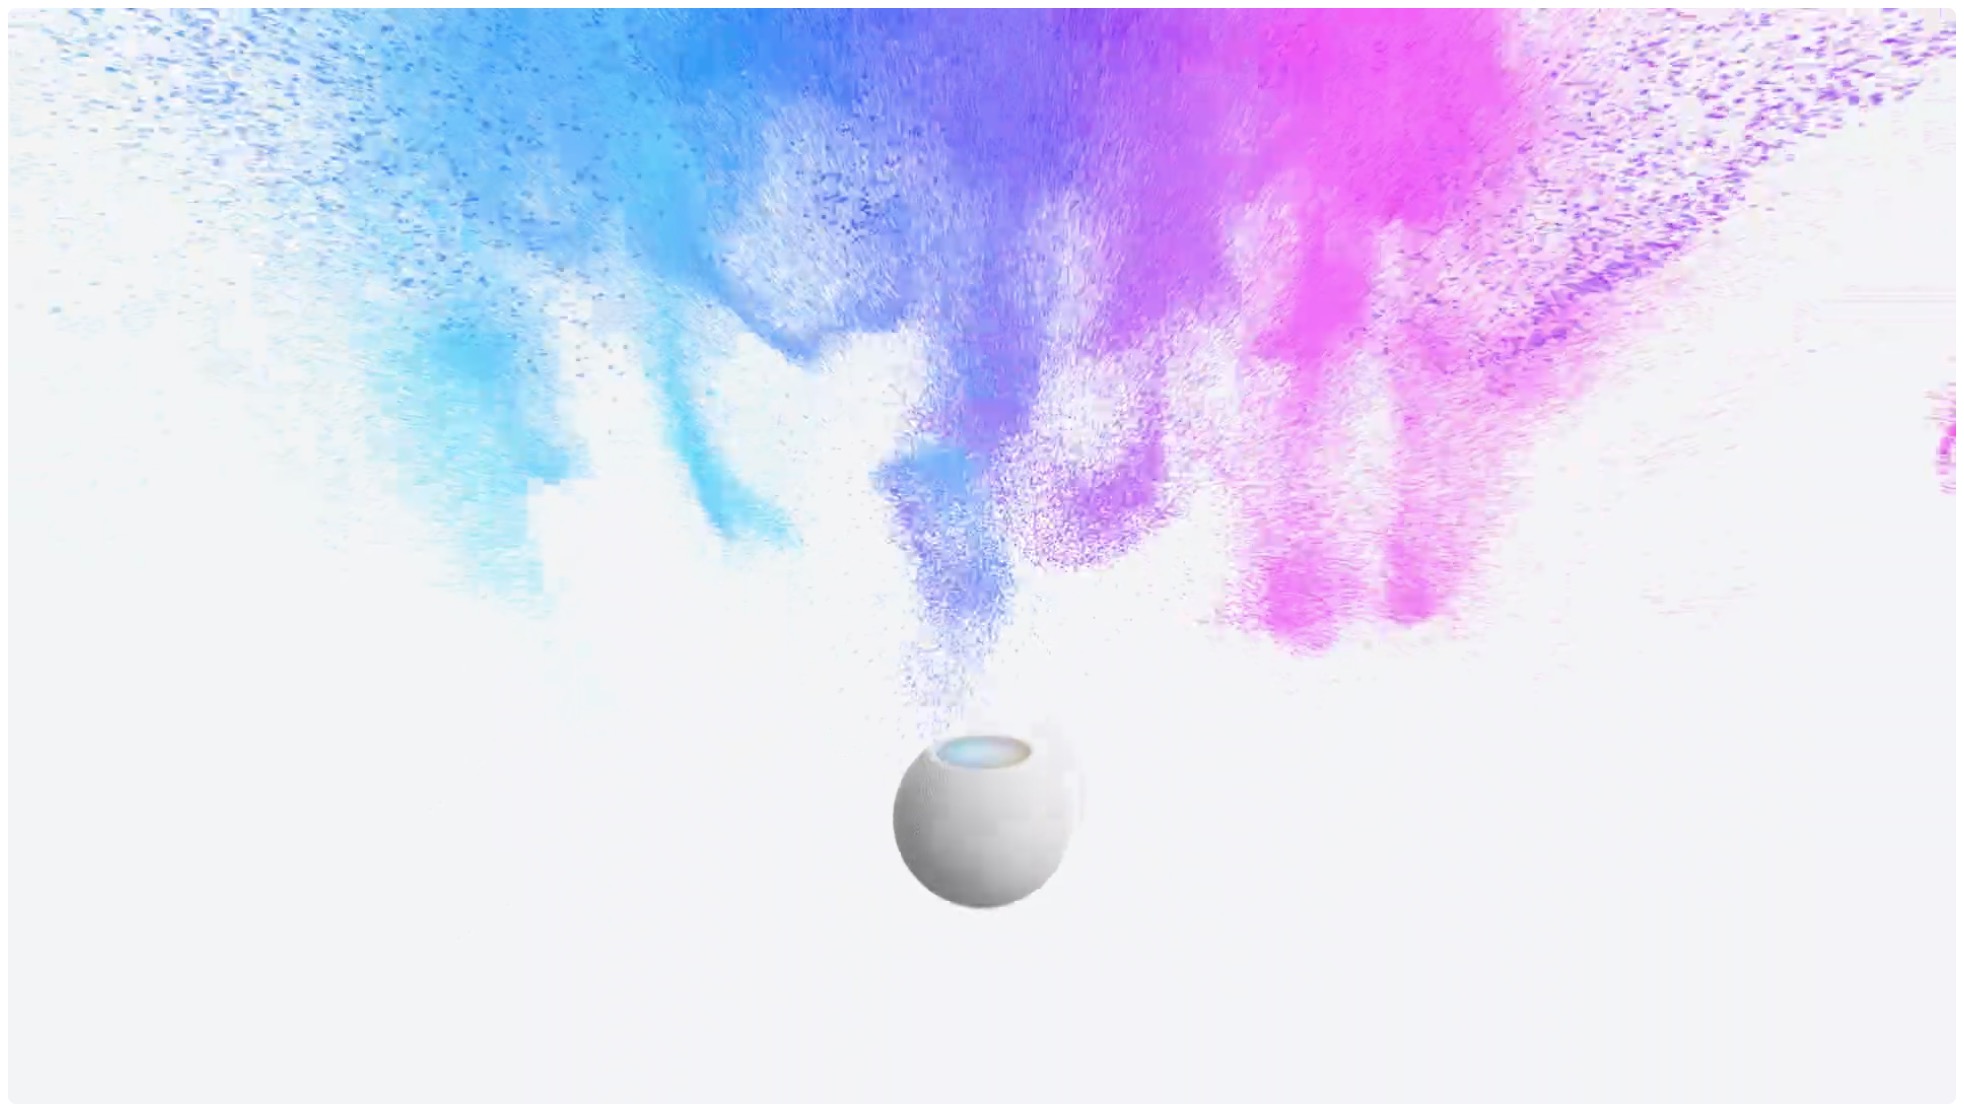 A promotional image showing Apple HomePod mini Siri speaker set against a colorful background